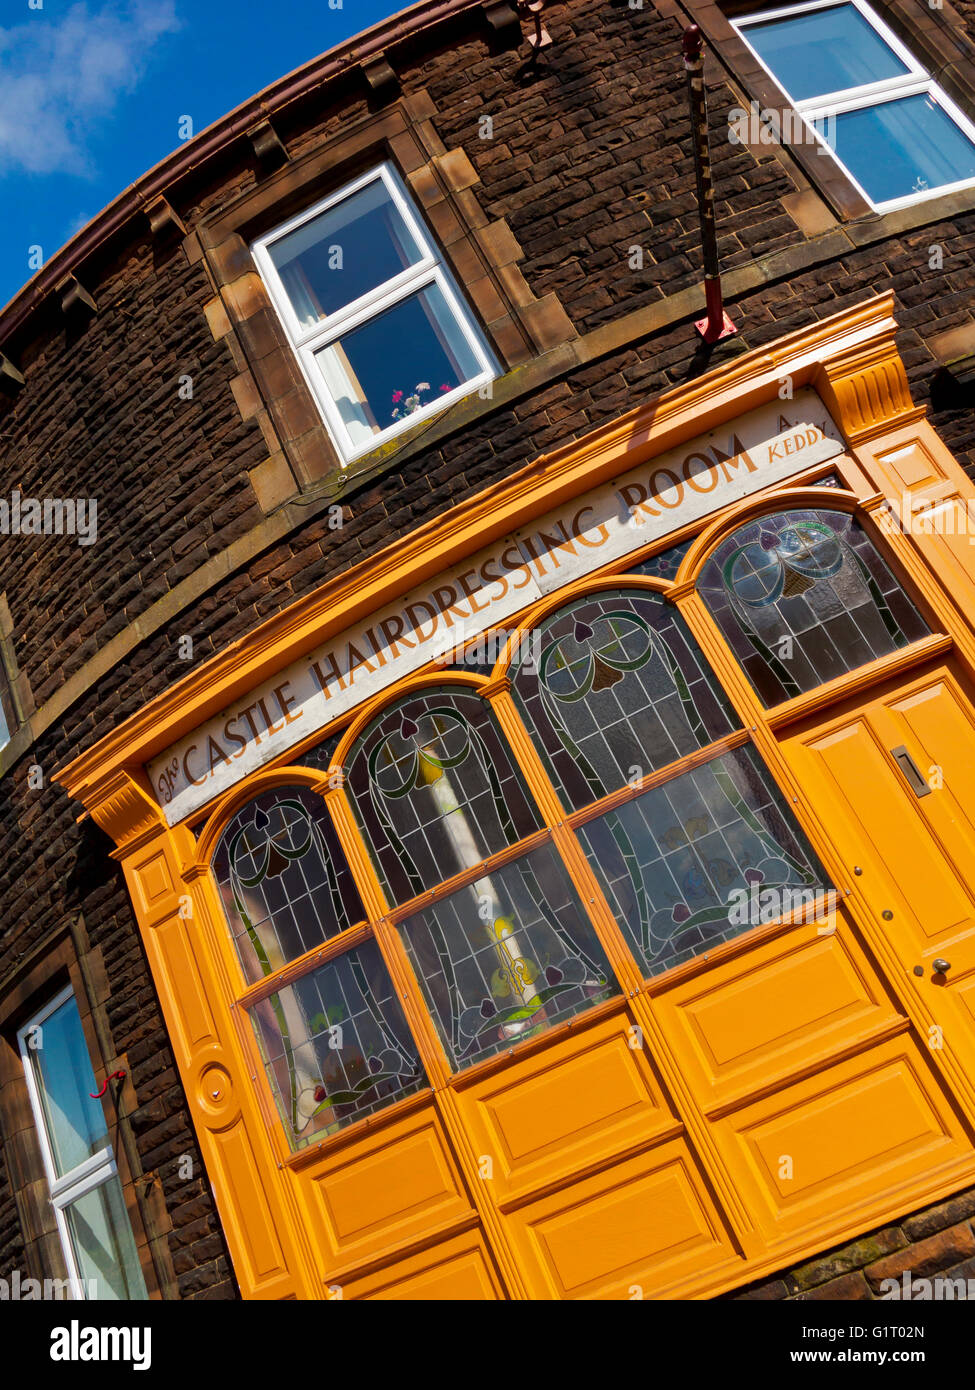 Traditional hairdressing salon on curved building in Carlisle city centre Cumbria England UK Stock Photo